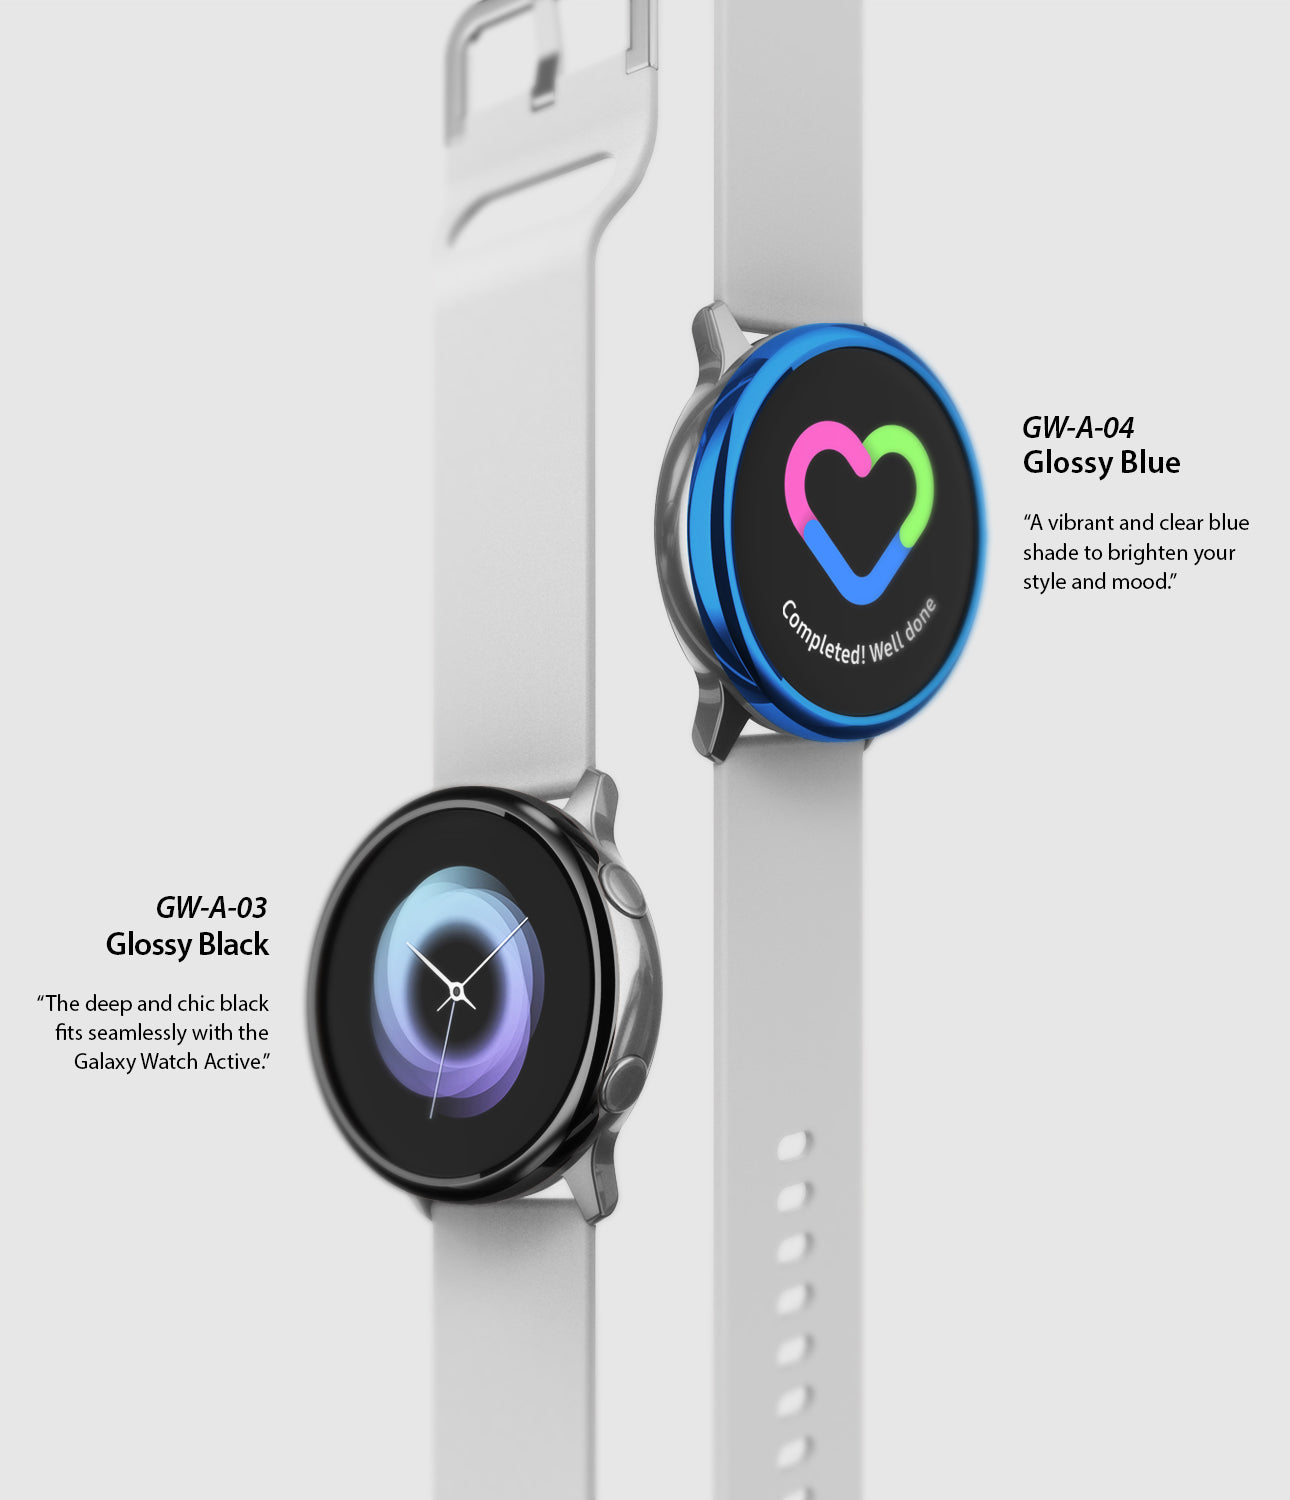 ringke bezel styling for galaxy watch active available in various color options